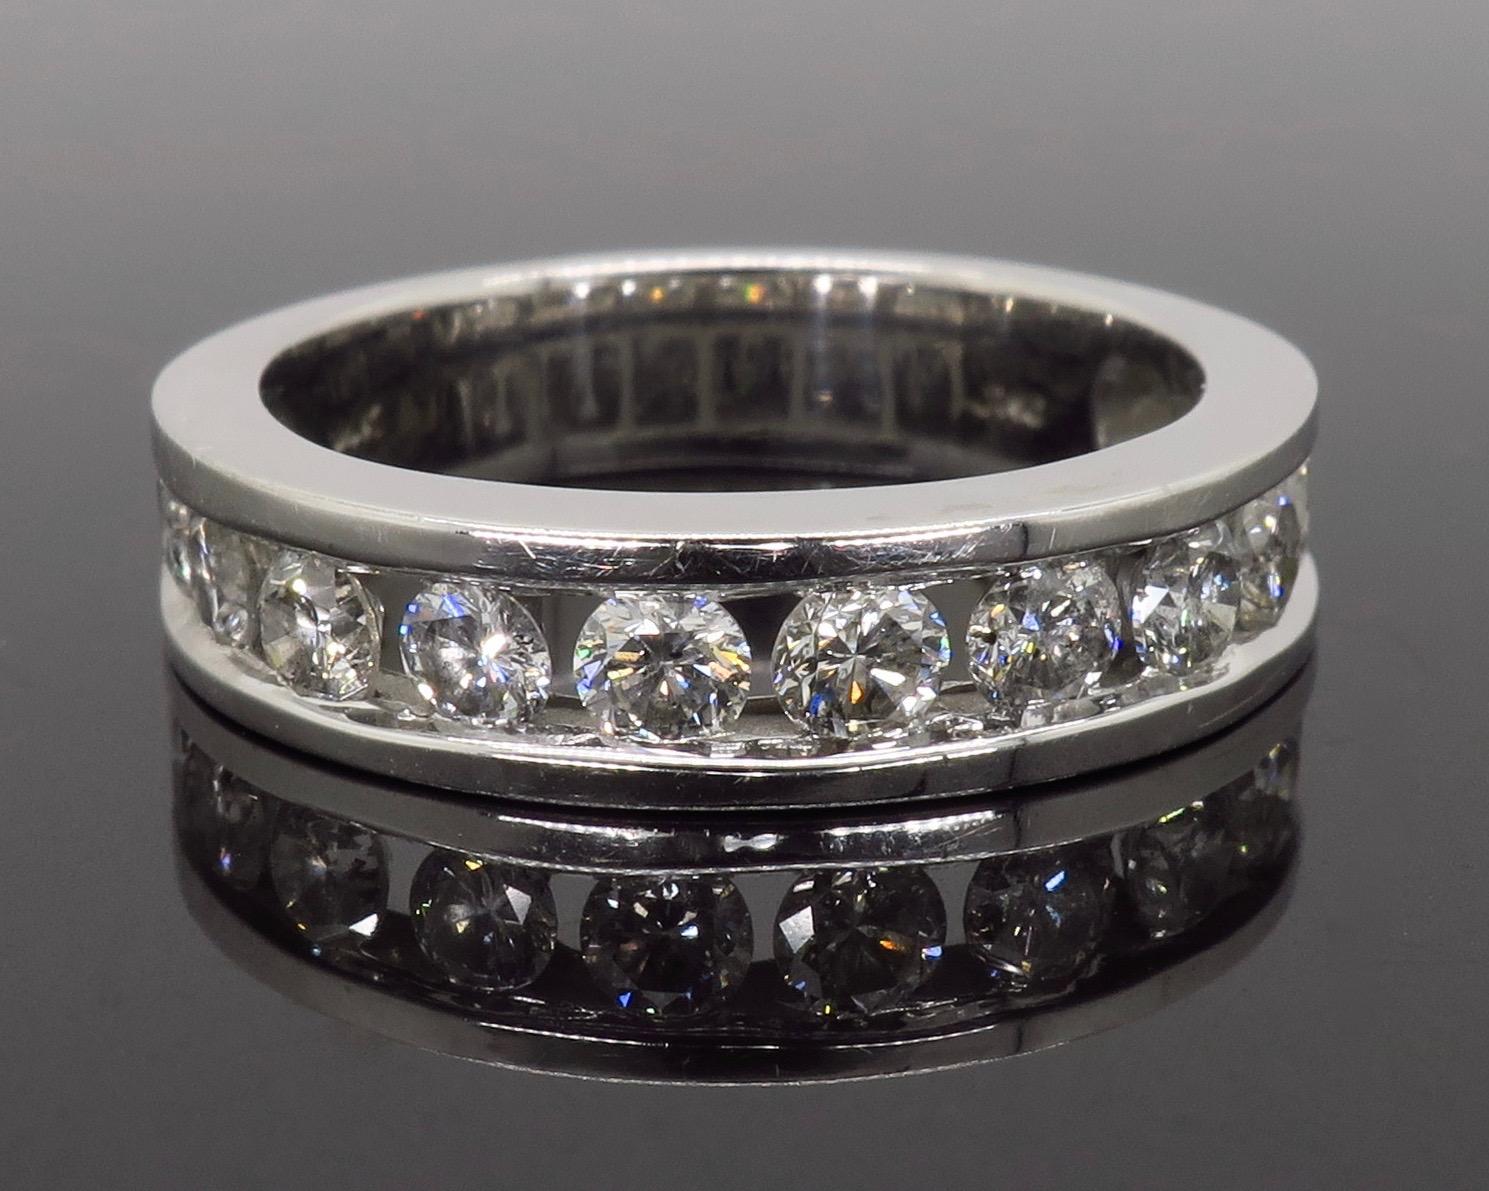 One carat Round Brilliant Diamond band crafted in 14K white gold.

Gemstone: Diamond
Diamond Carat Weight: Approximately 1.00ctw
Diamond Cut: Round Brilliant Cut
Color: Average G-I
Clarity: Average I
Metal: 14K White Gold
Marked/Tested: Stamped “14K